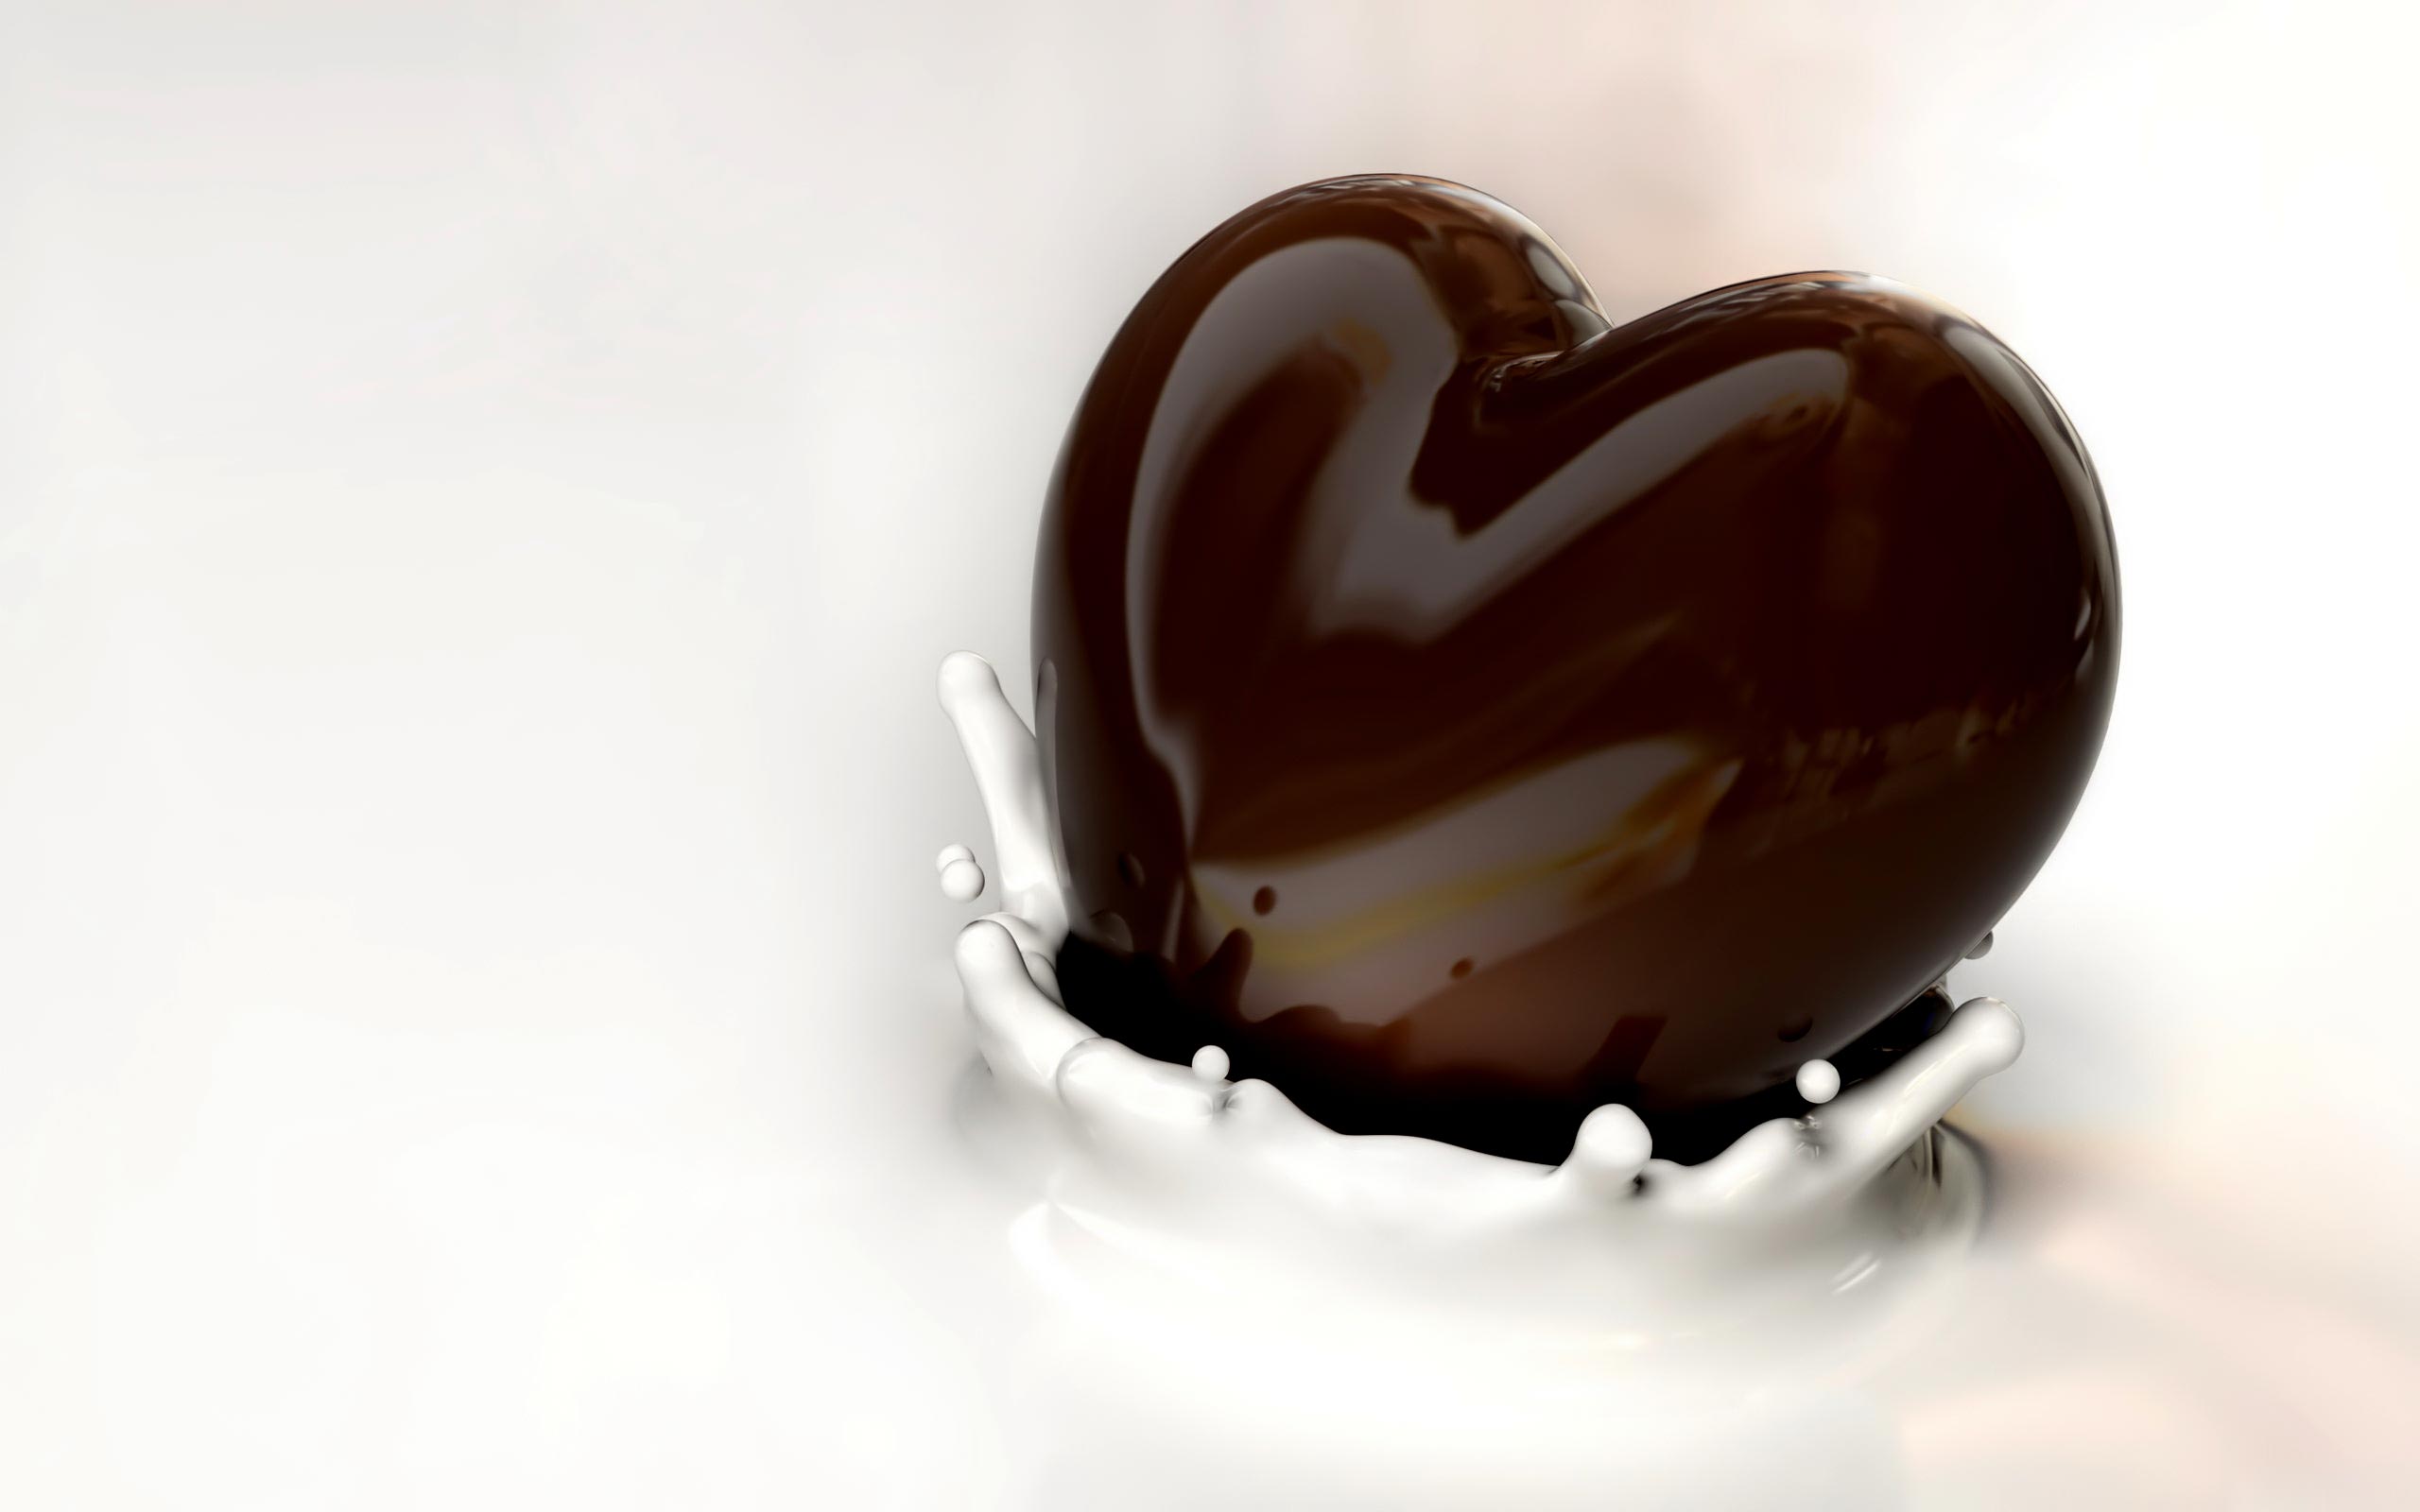 Widescreen HD Wallpaper > Holiday > Milk and Chocolate Valentine's Day Heart HD wallpaper. High Definition Wallpaper > HD Resolution: 2560x1600